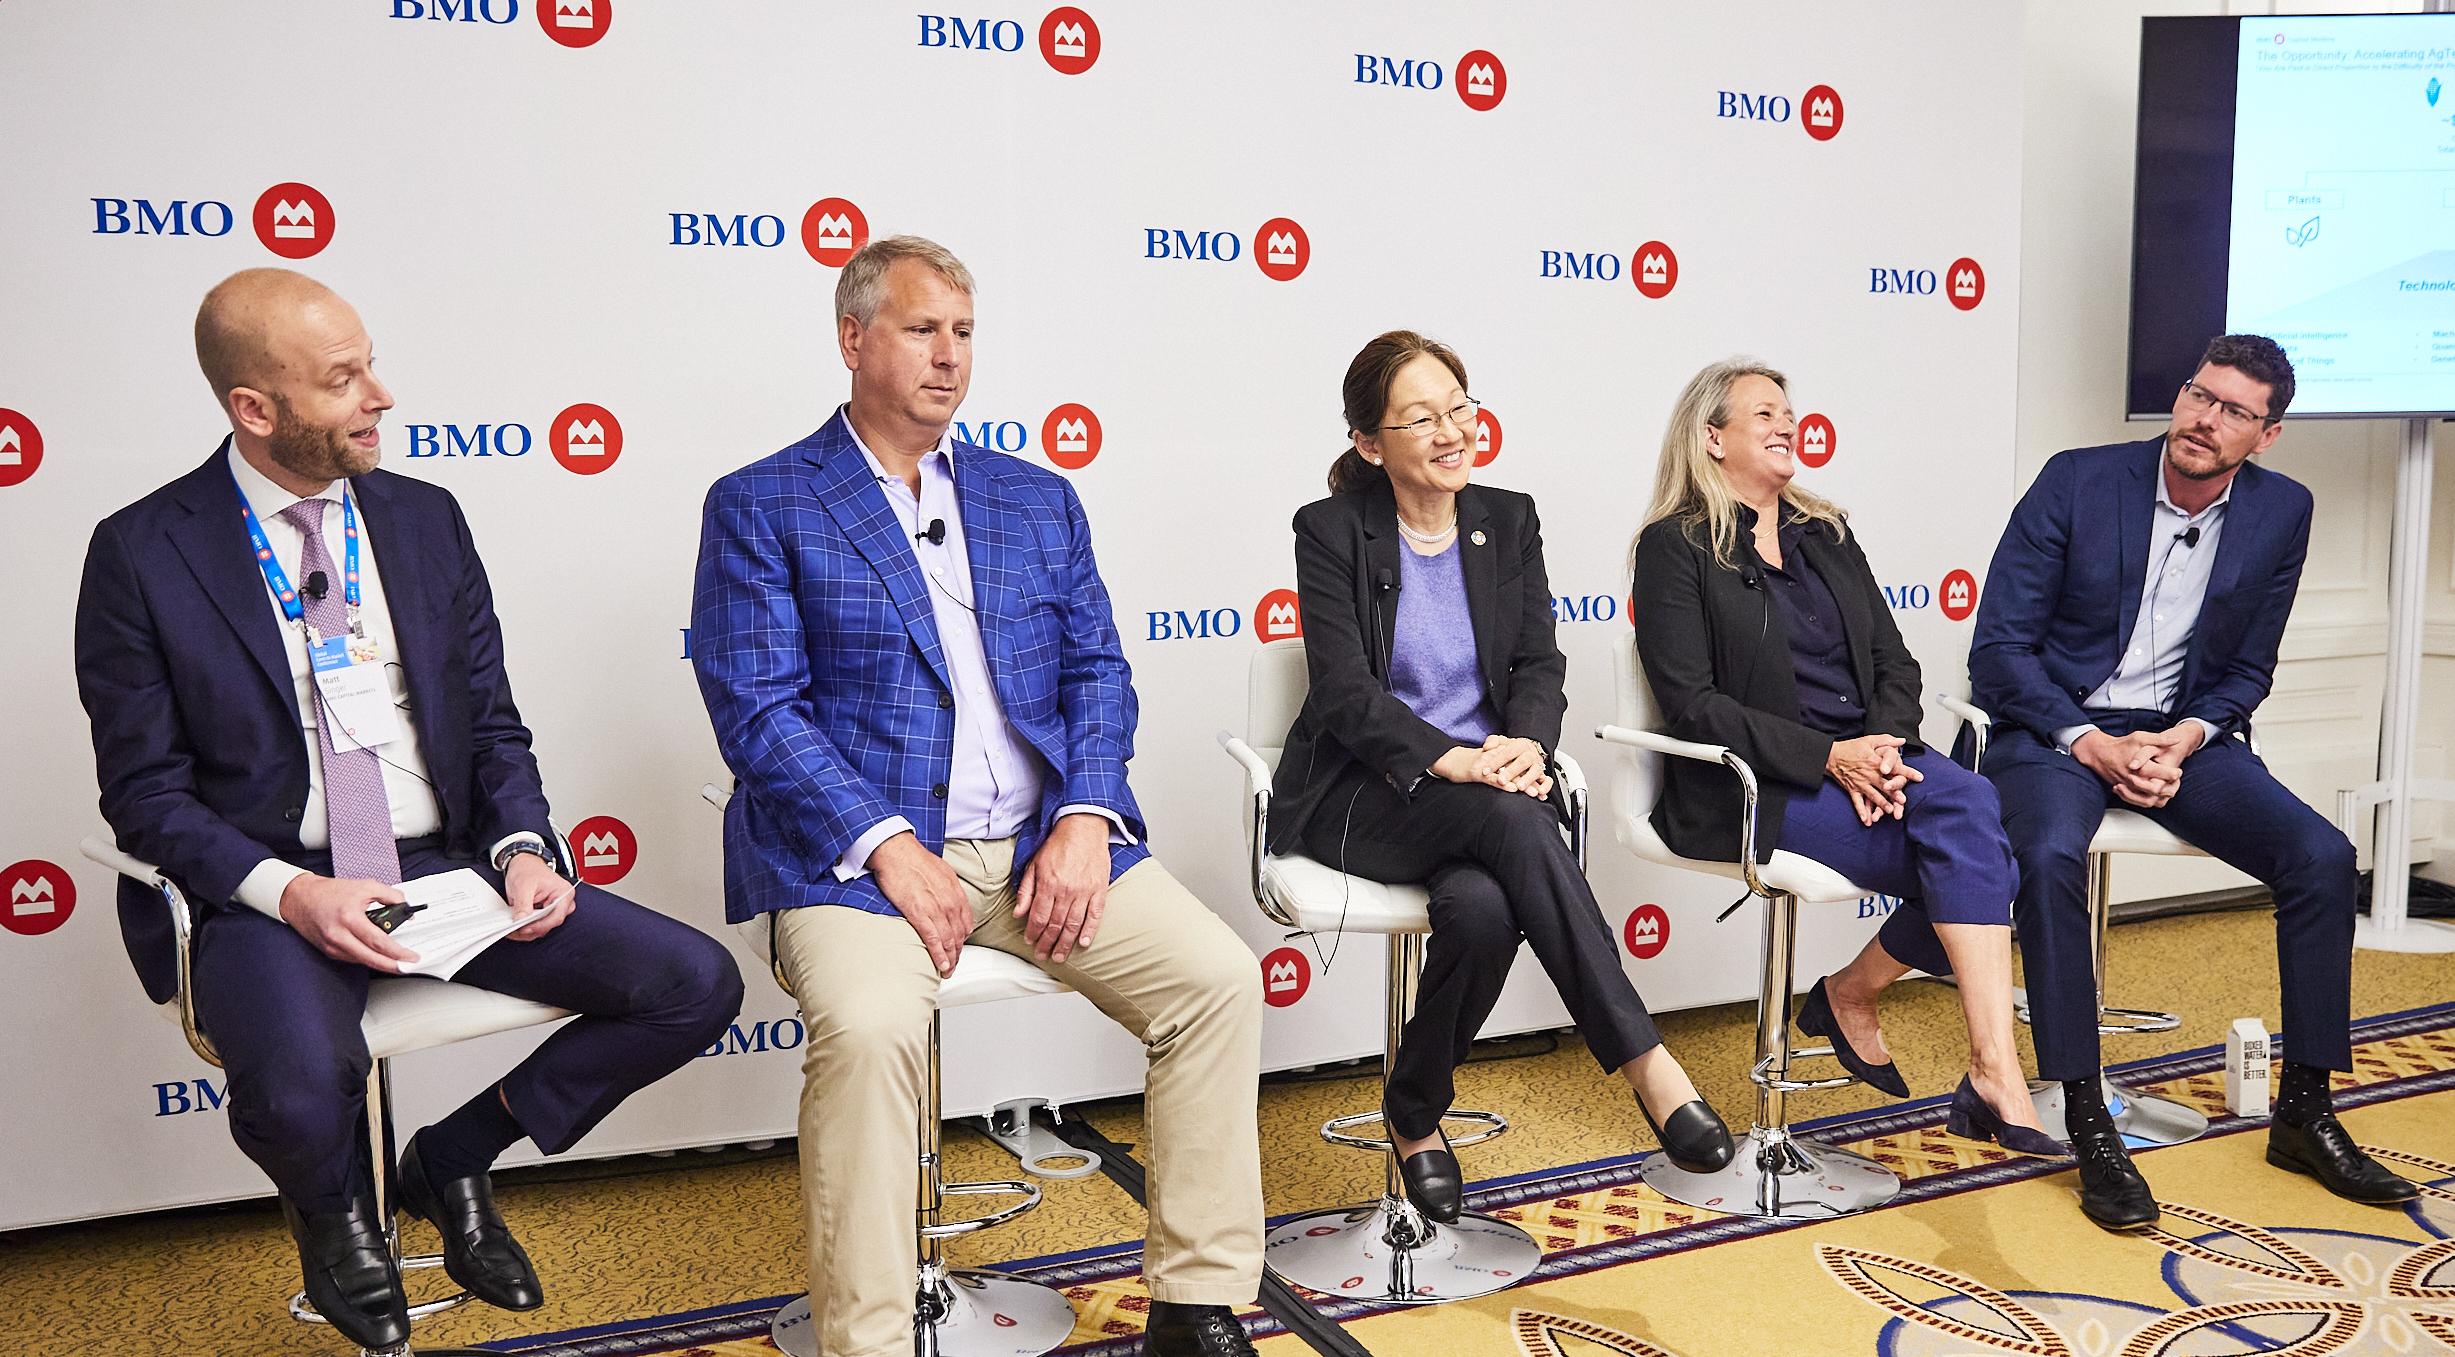 Panelists on Agtech Innovation at the BMO Global Farm to Market Conference